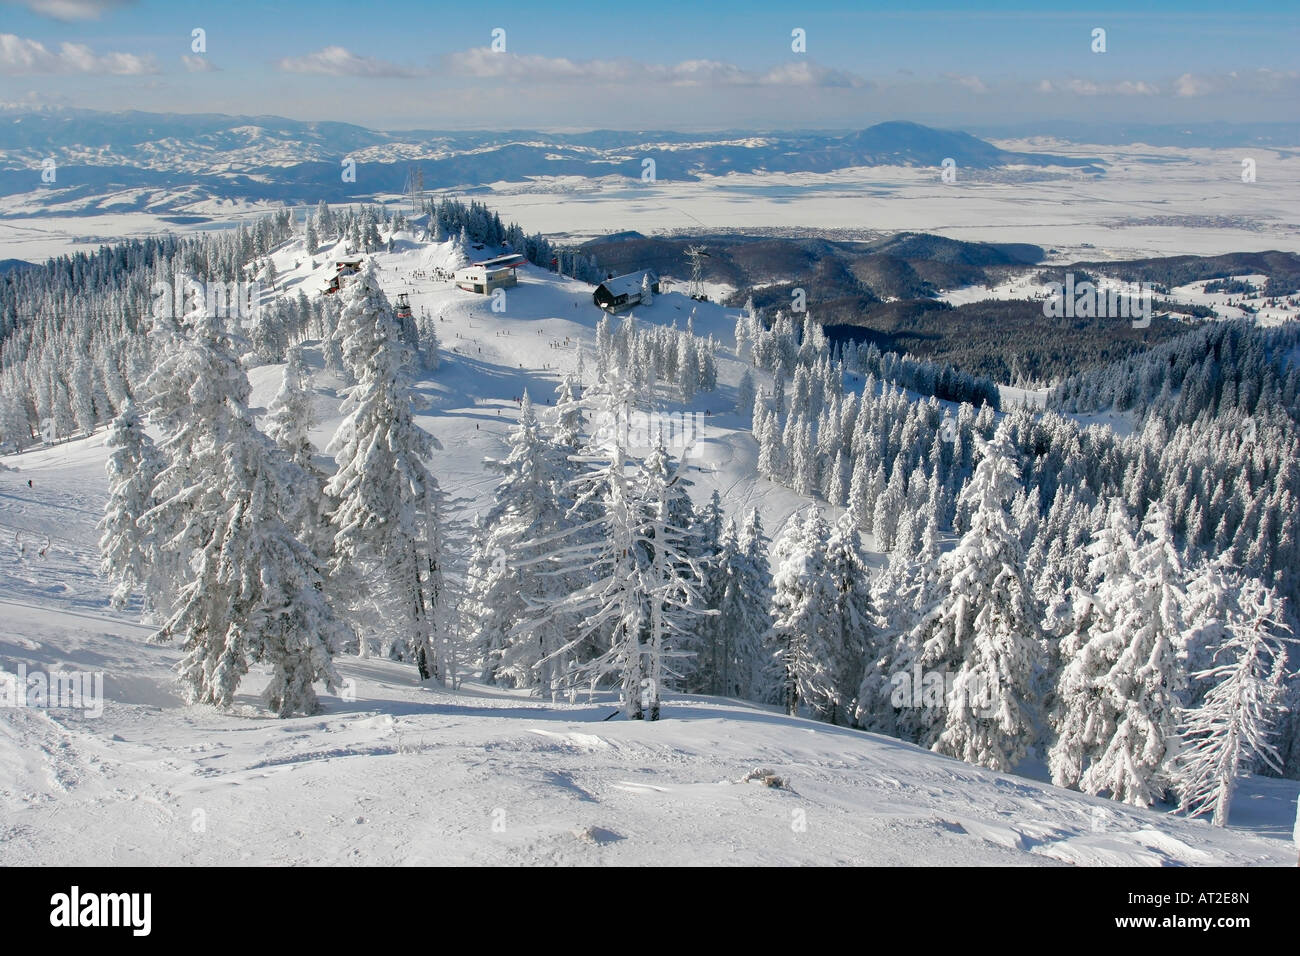 Winter vacation place panoramic view Stock Photo